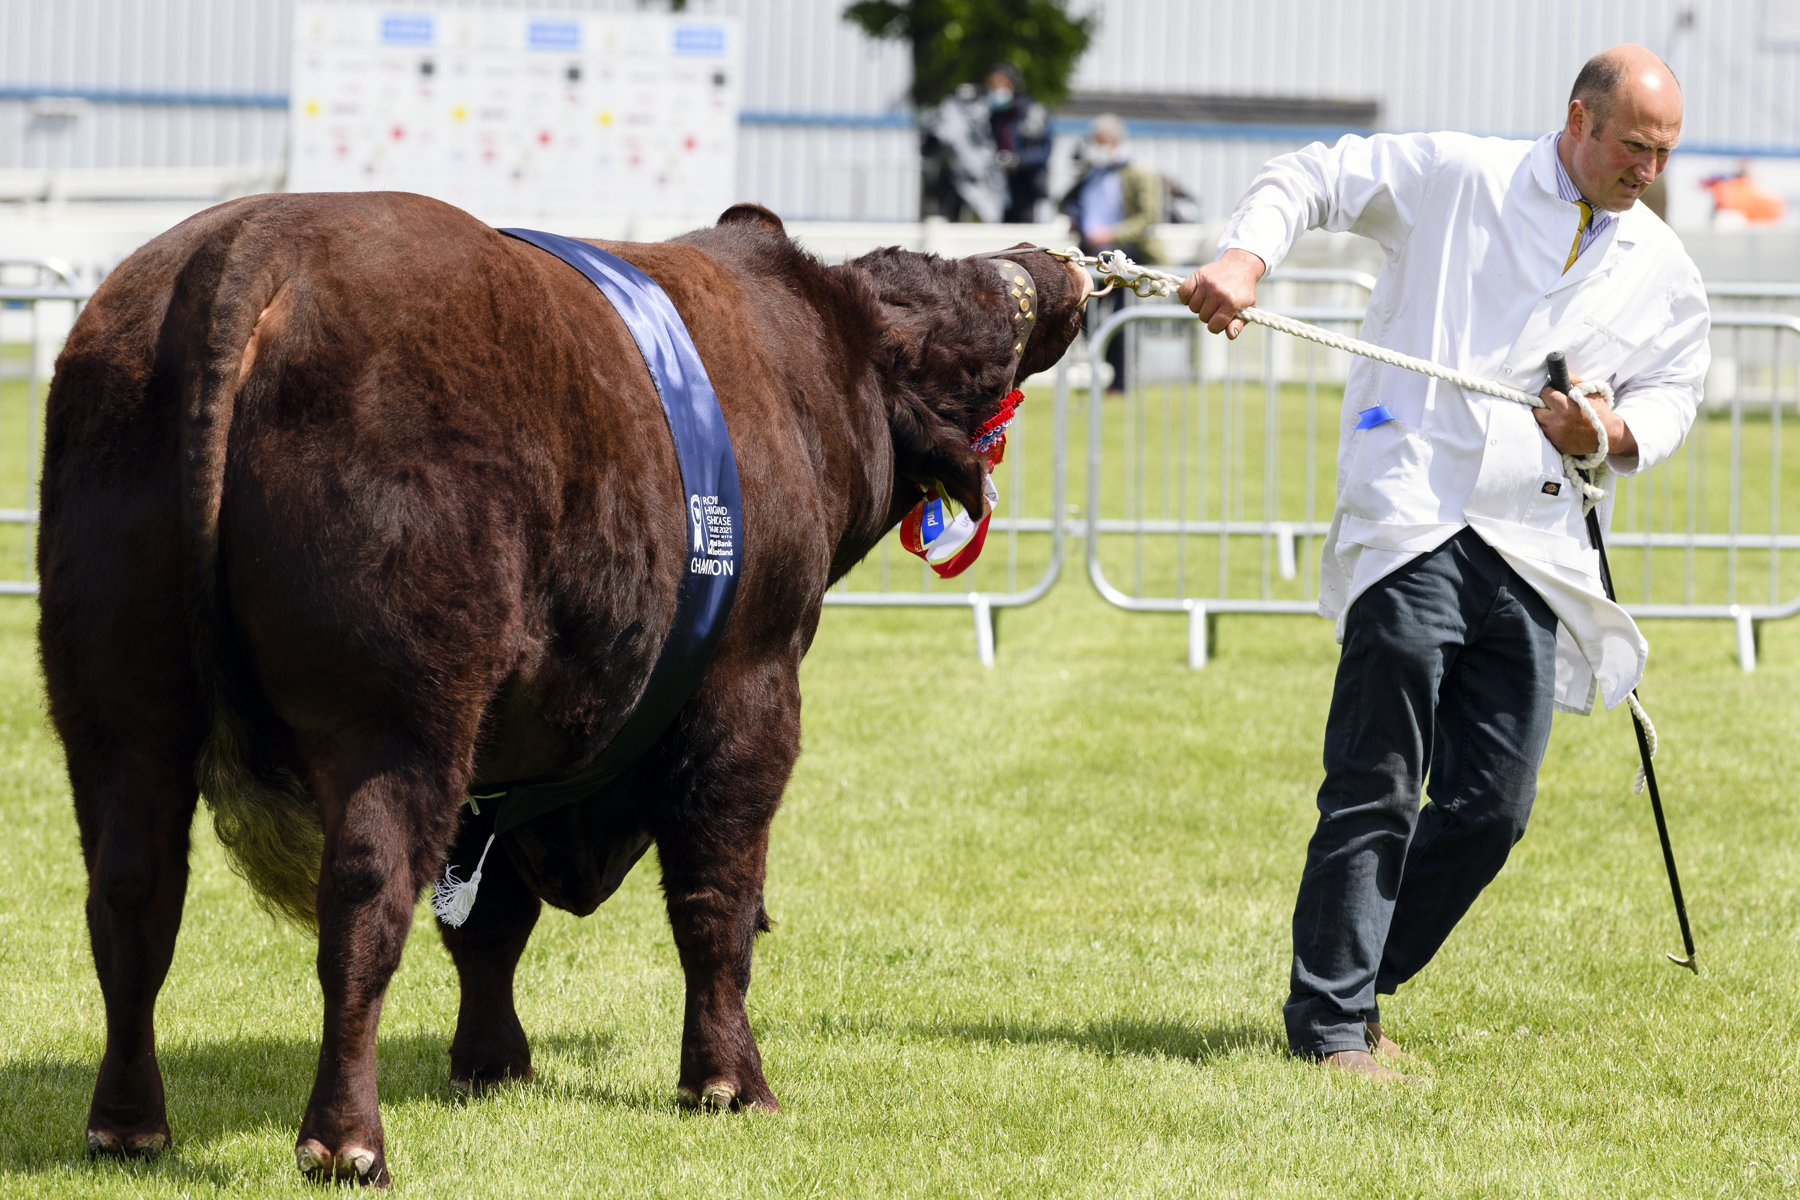 One competitor at the Royal Highland Showcase this year (Photo: Ian Georgeson)